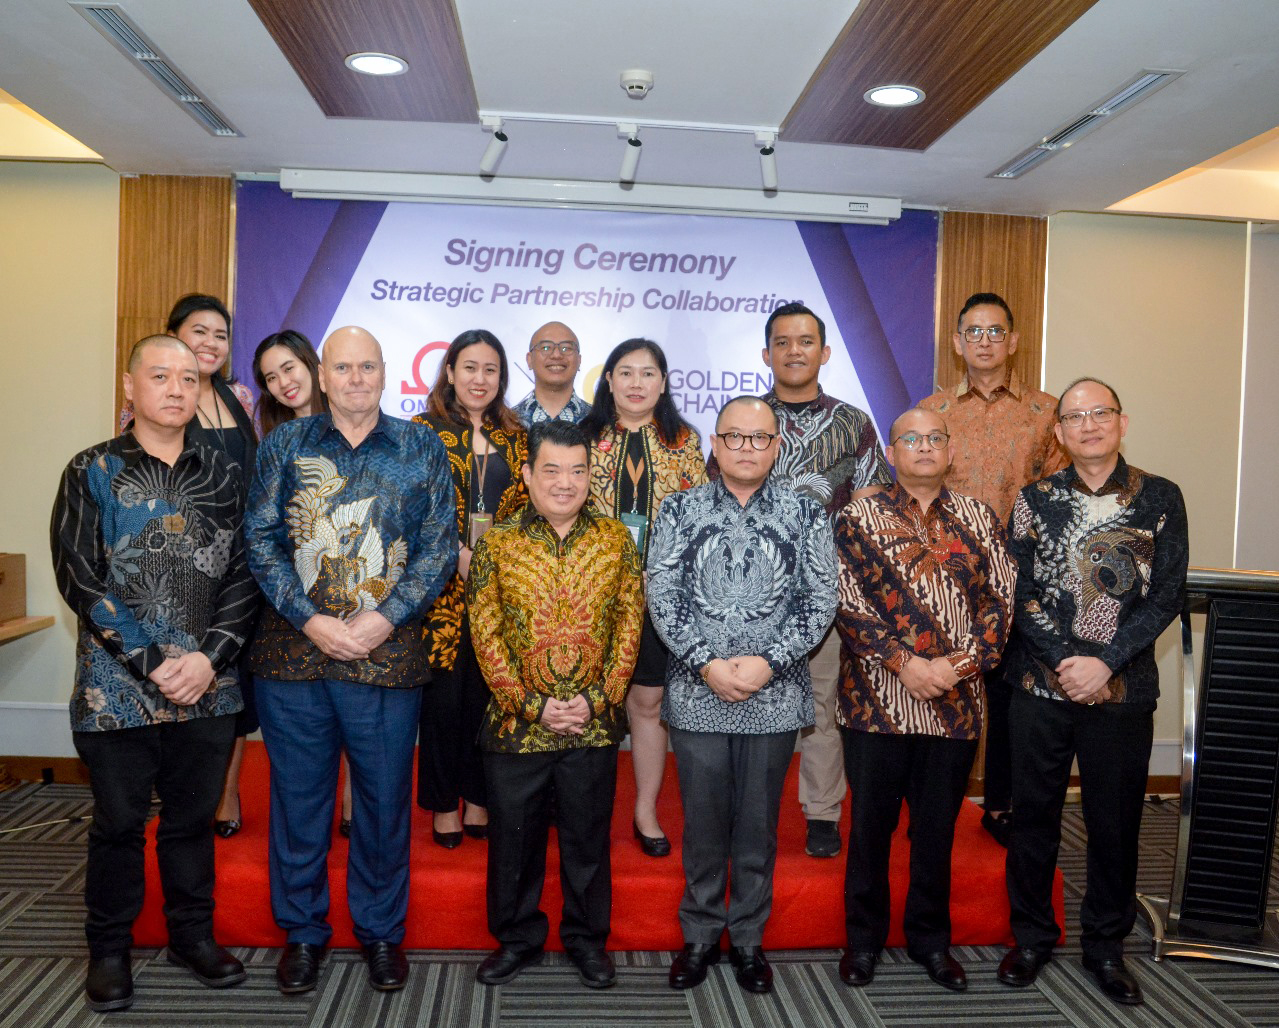 omega-hotel-management-a-national-hotel-operator-with-brands-cordela-suites-grand-cordela-cordela-cordela-inn-and-cordex-proudly-announces-the-signing-of-a-strategic-partnership-agreement-with-golden-chain-motor-inns-ltd-the-largest-motel-chai